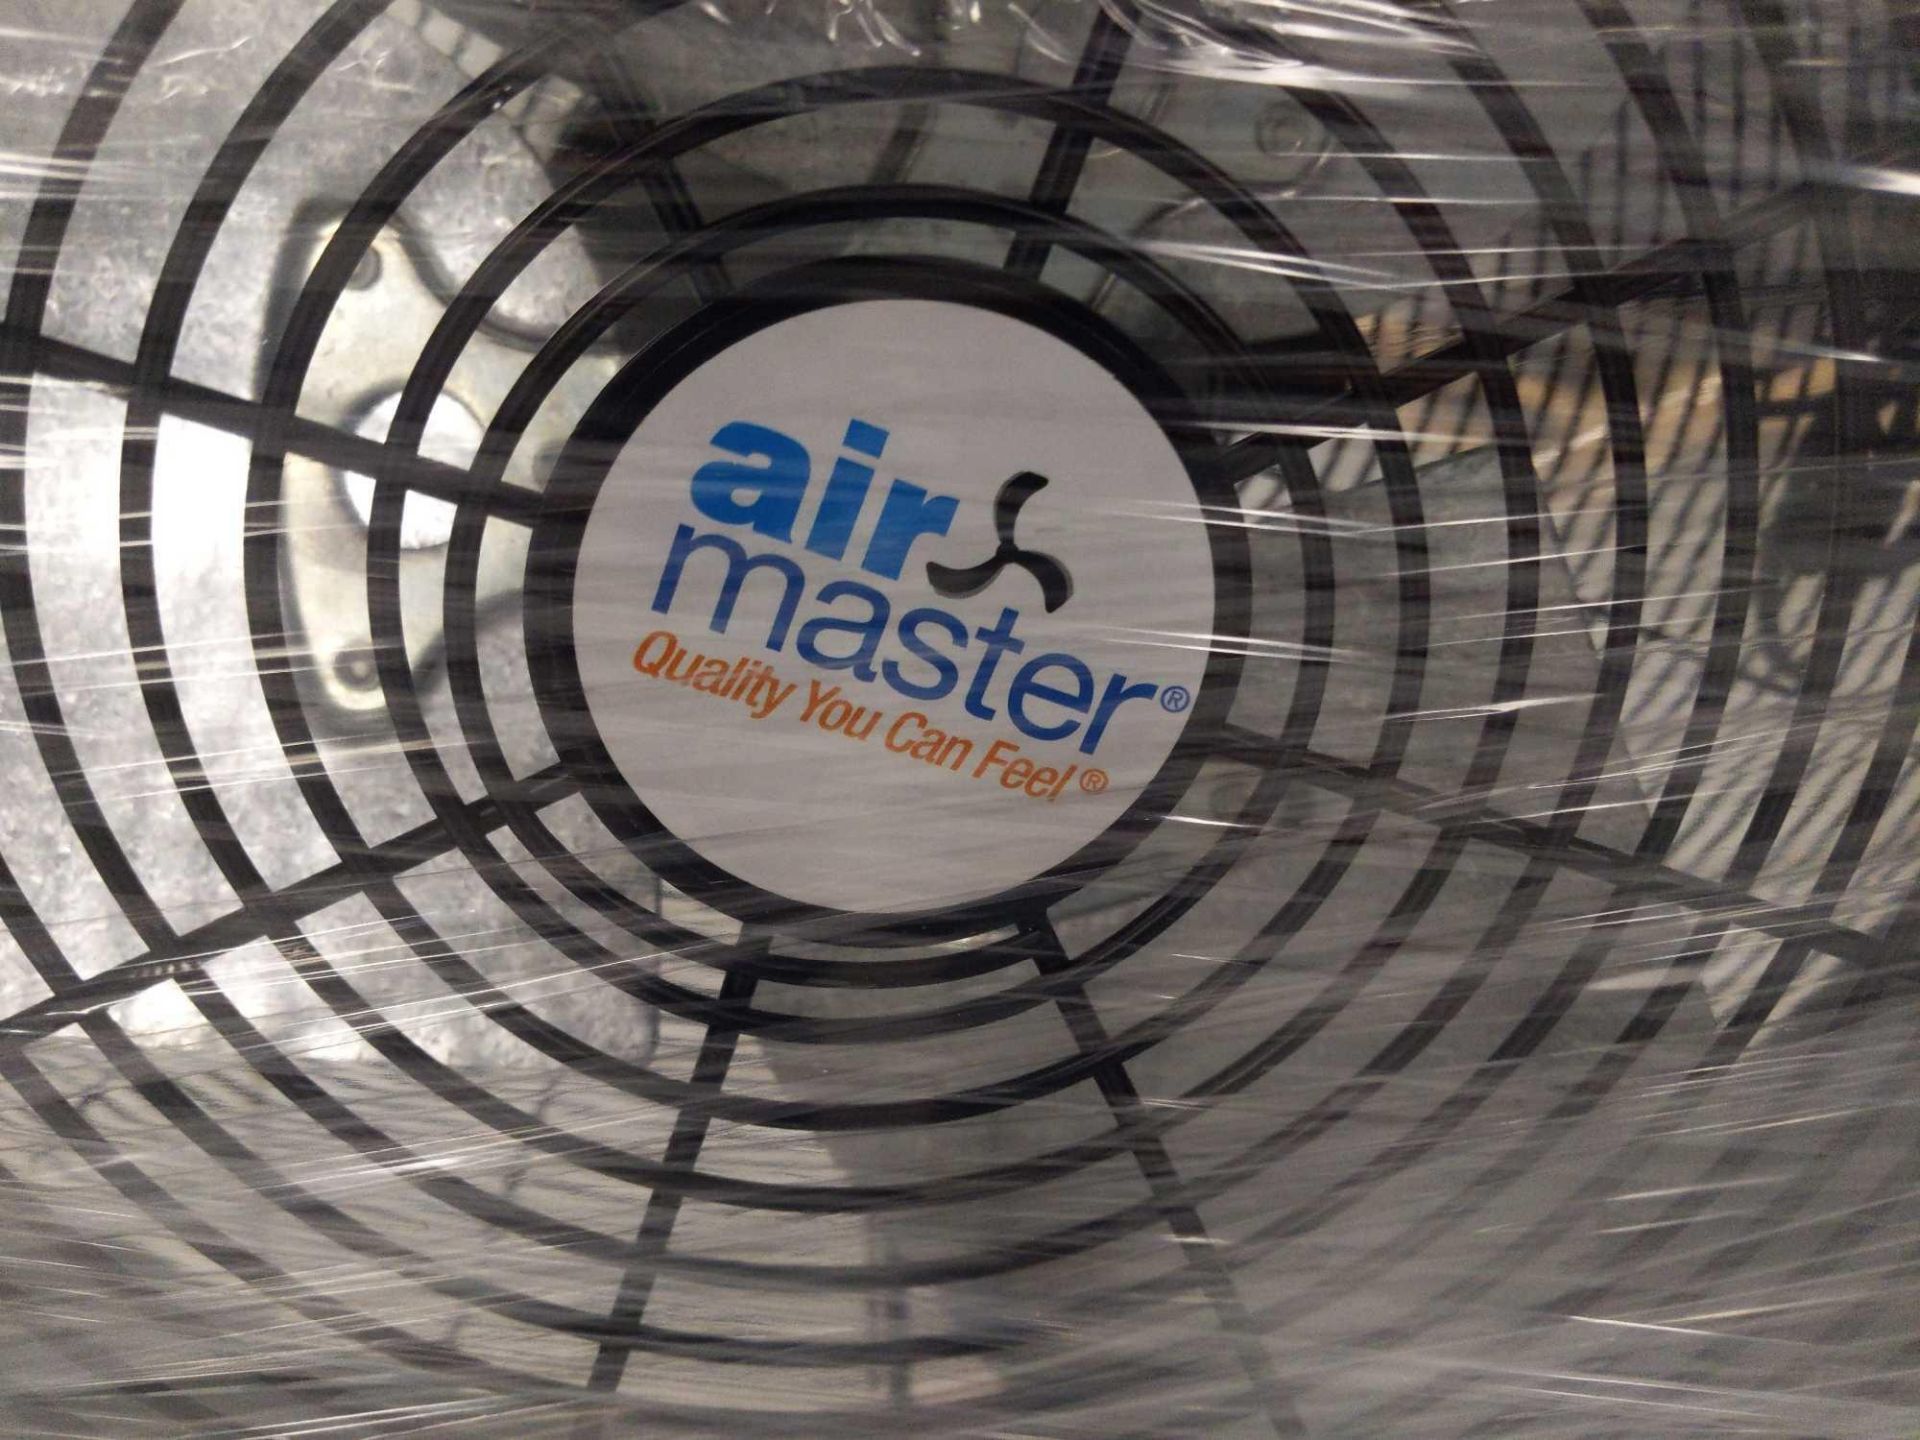 2 Large Air Master Fans with Wheels - Image 3 of 9